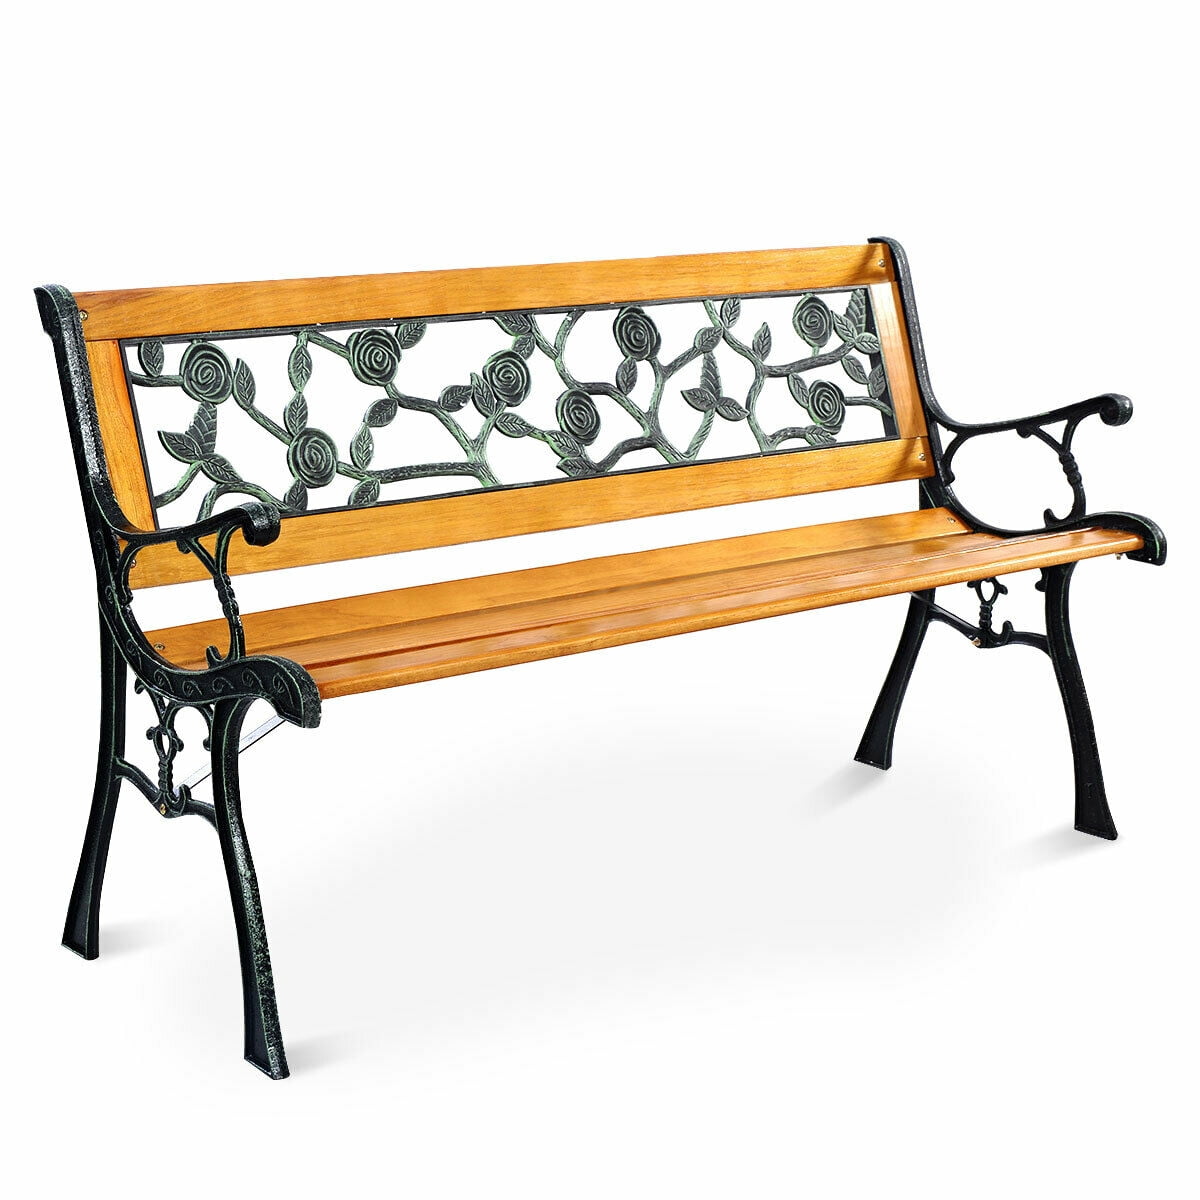 Patio Bench Garden Bench Outdoor Bench Metal Porch Chair Cast Iron Hardwood Furniture Animals for Park Yard Patio Deck Lawn 480LBS Weight Capacity